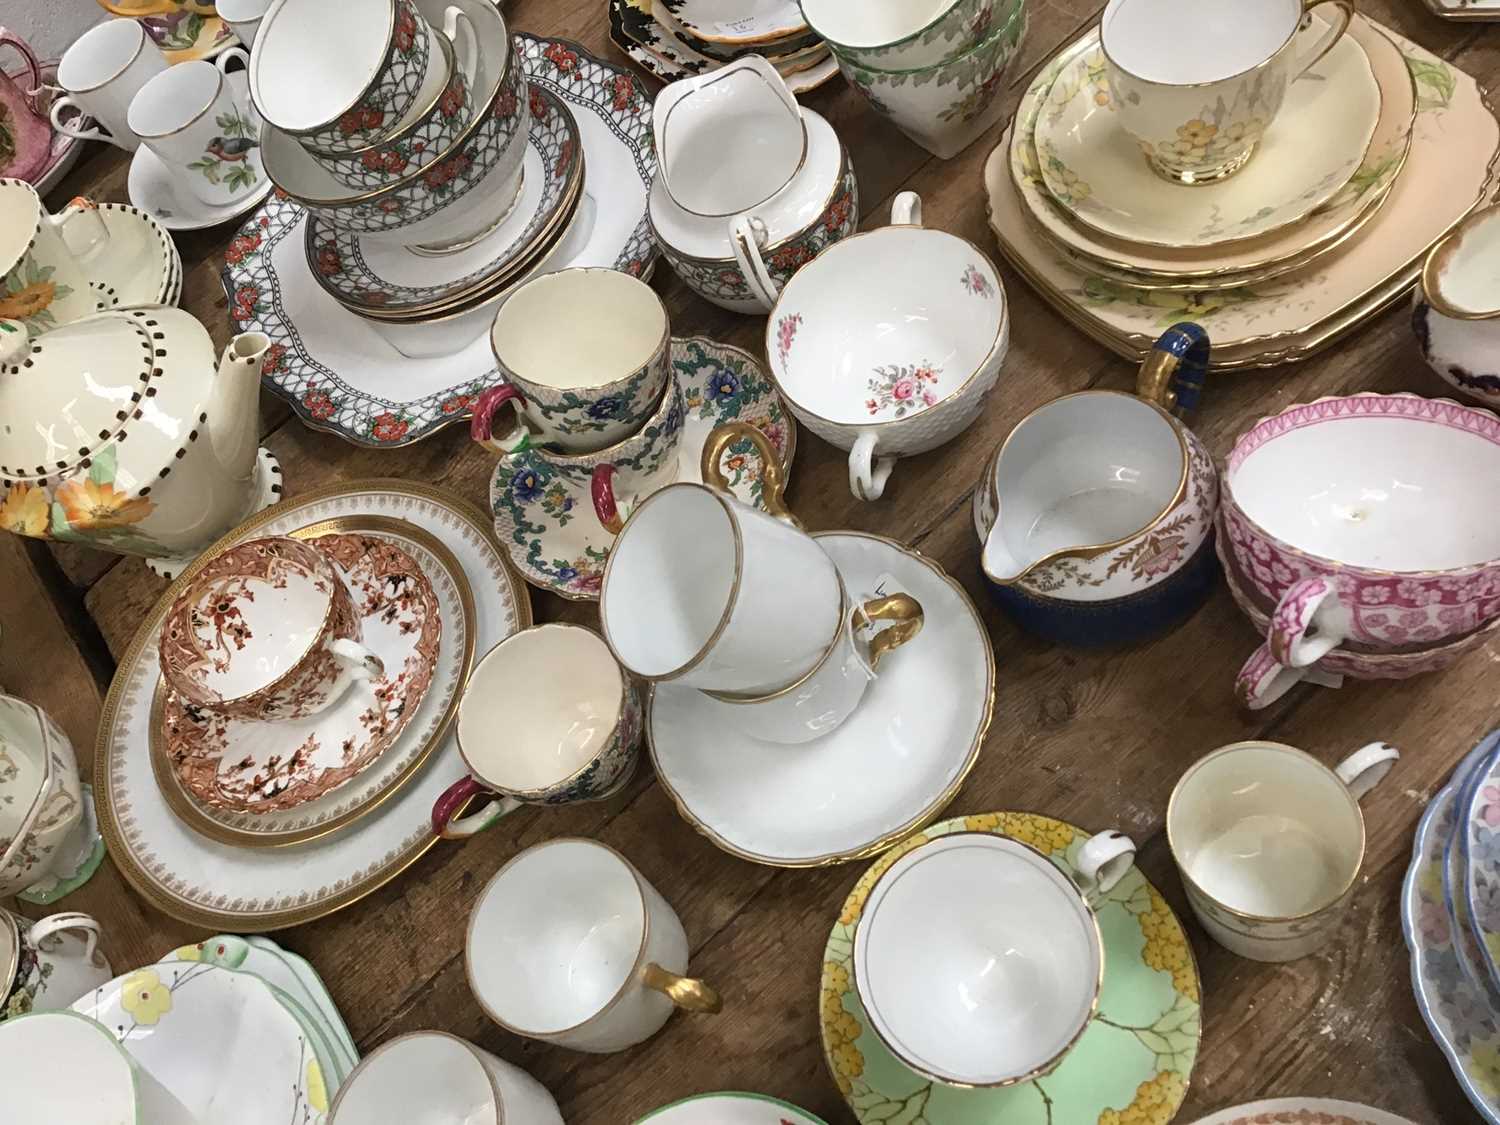 Lot 16 - Set of five Dresden teacups with two saucers, together with a quantity of china including a pair of Aynsley teacup and saucers, Spode milk jug, Royal Doulton, Shelley and Foley china